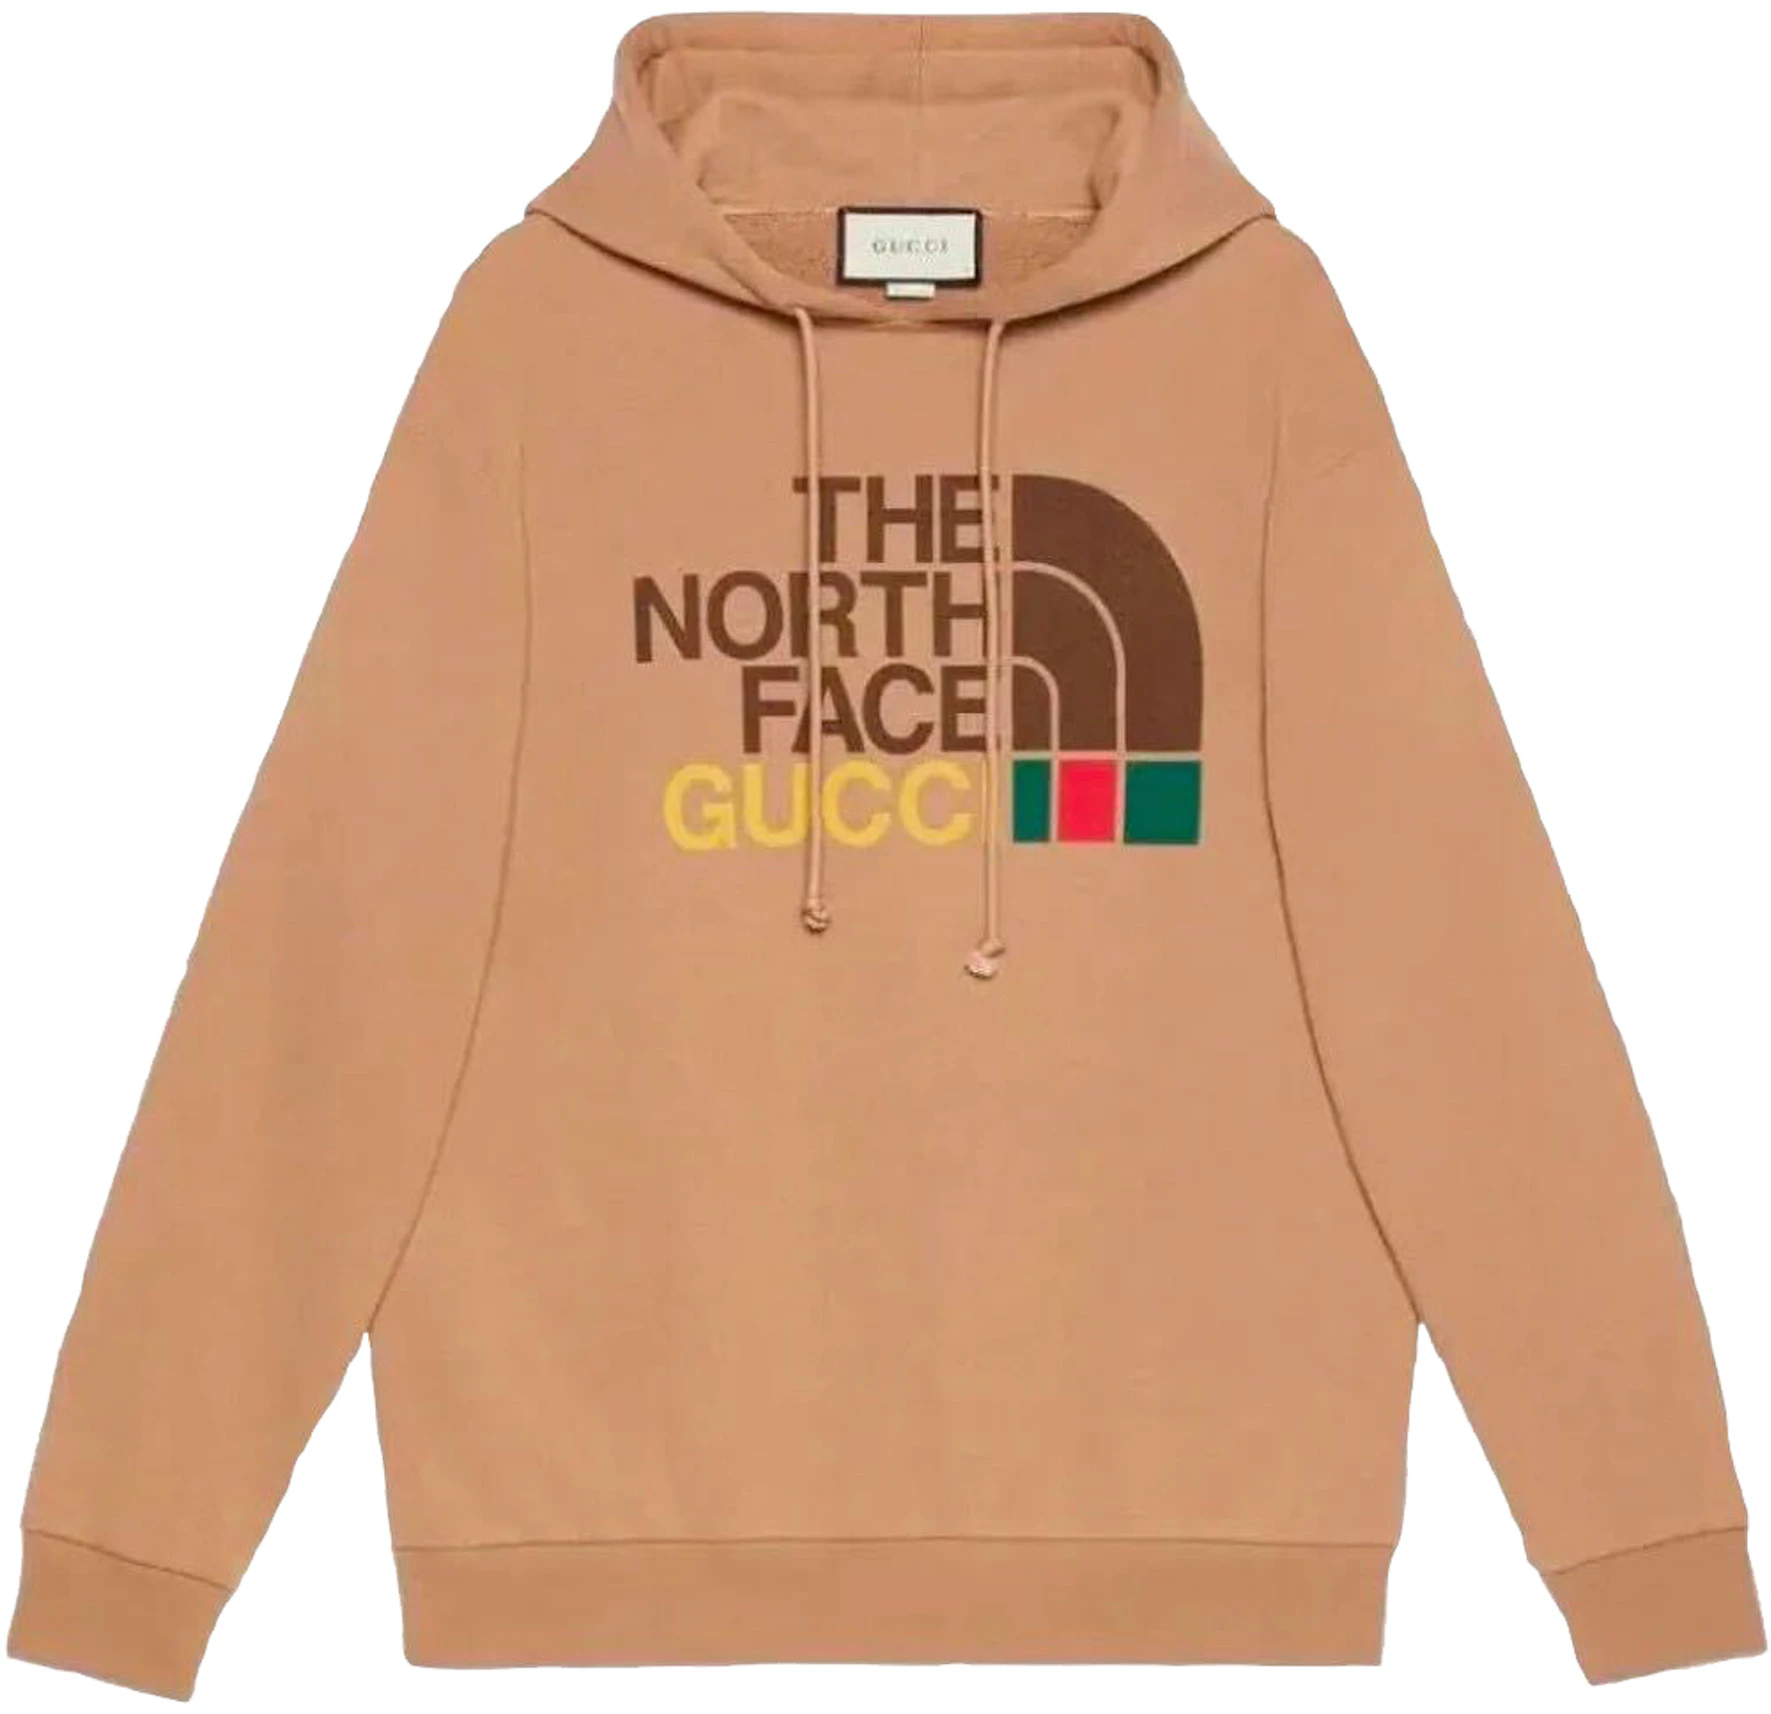 Gucci x The North Face Cotton Hoodie Brown - SS21 - US